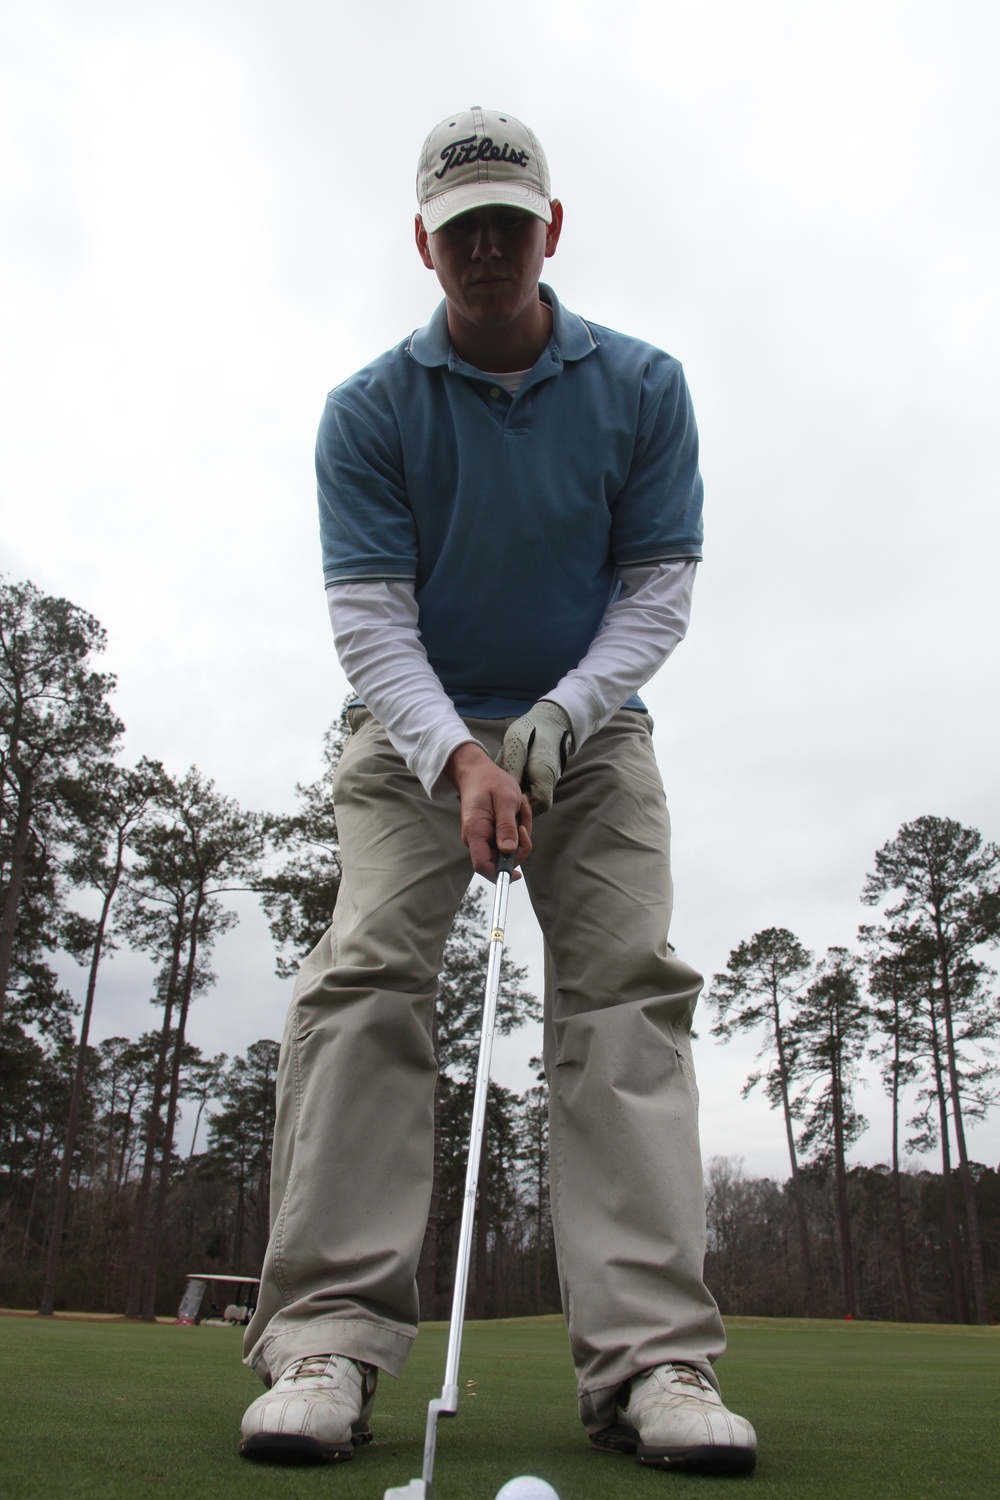 Season kick-off: Cherry Point golfers compete in first tournament of year